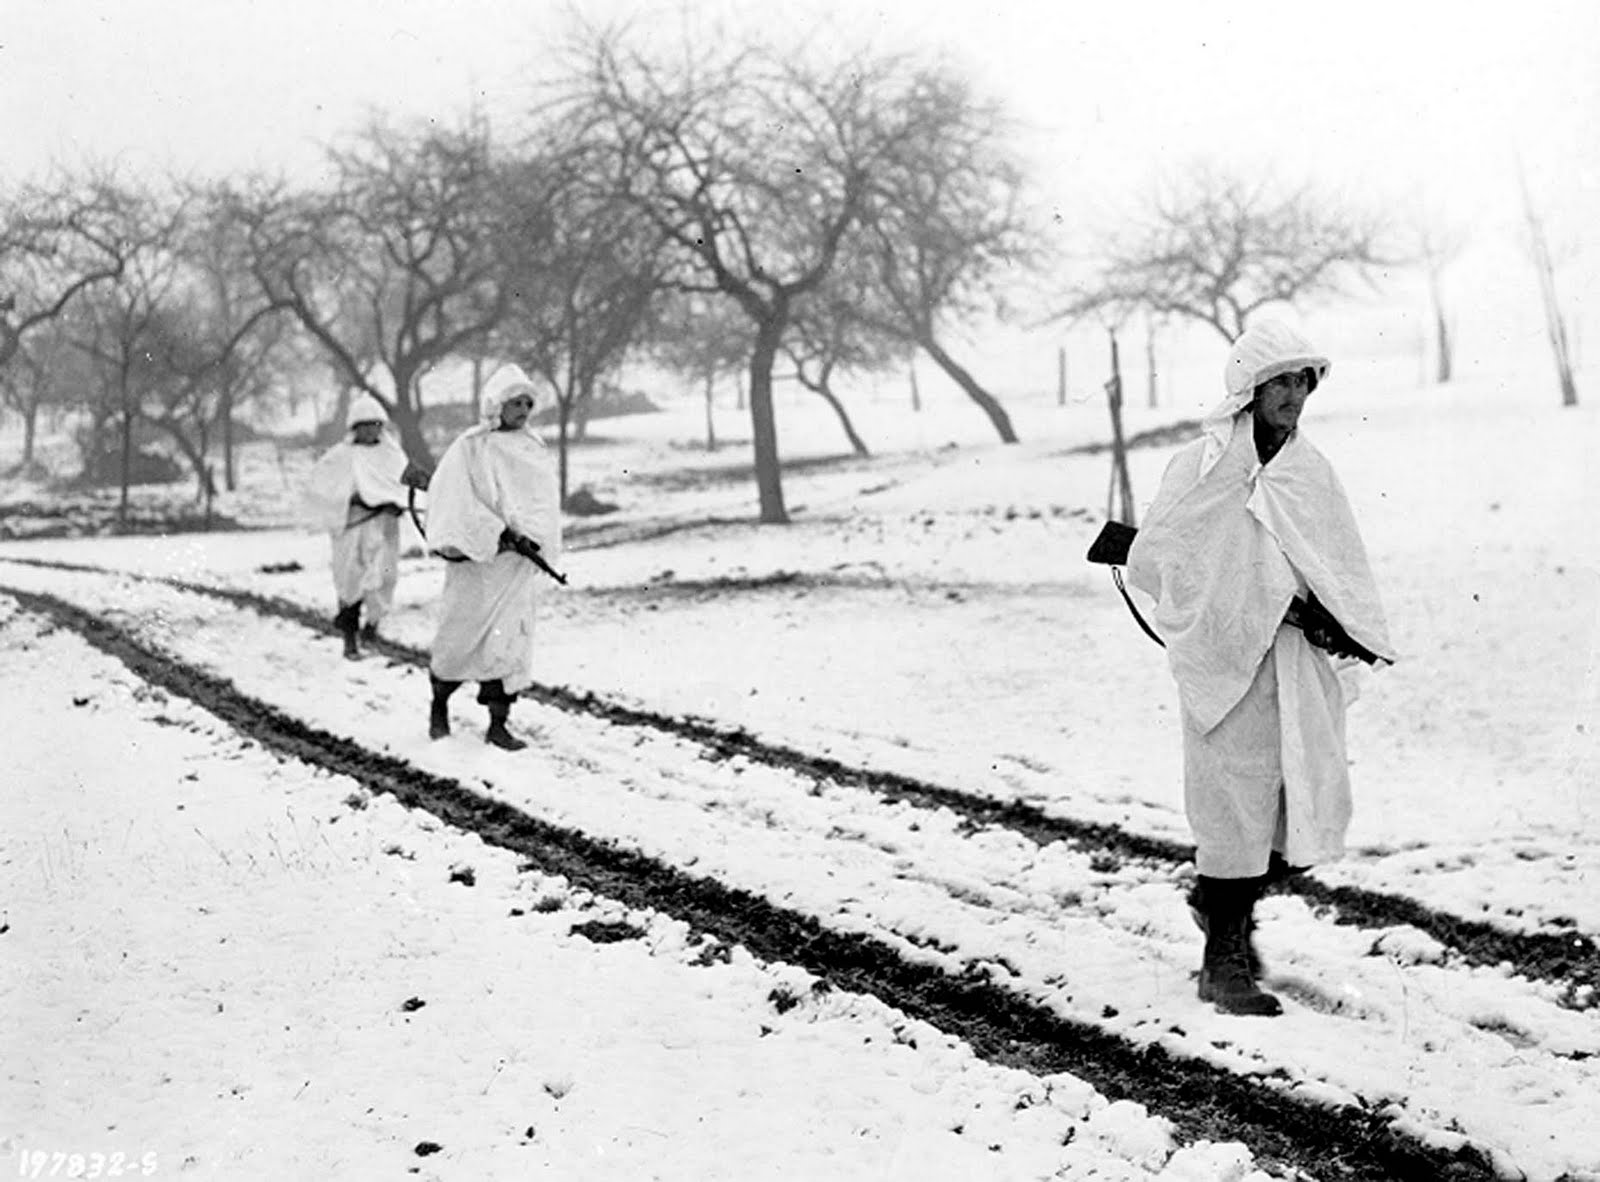 American soldiers traverse over snow-flecked terrain during the Battle of the Bulge. (National Archives)